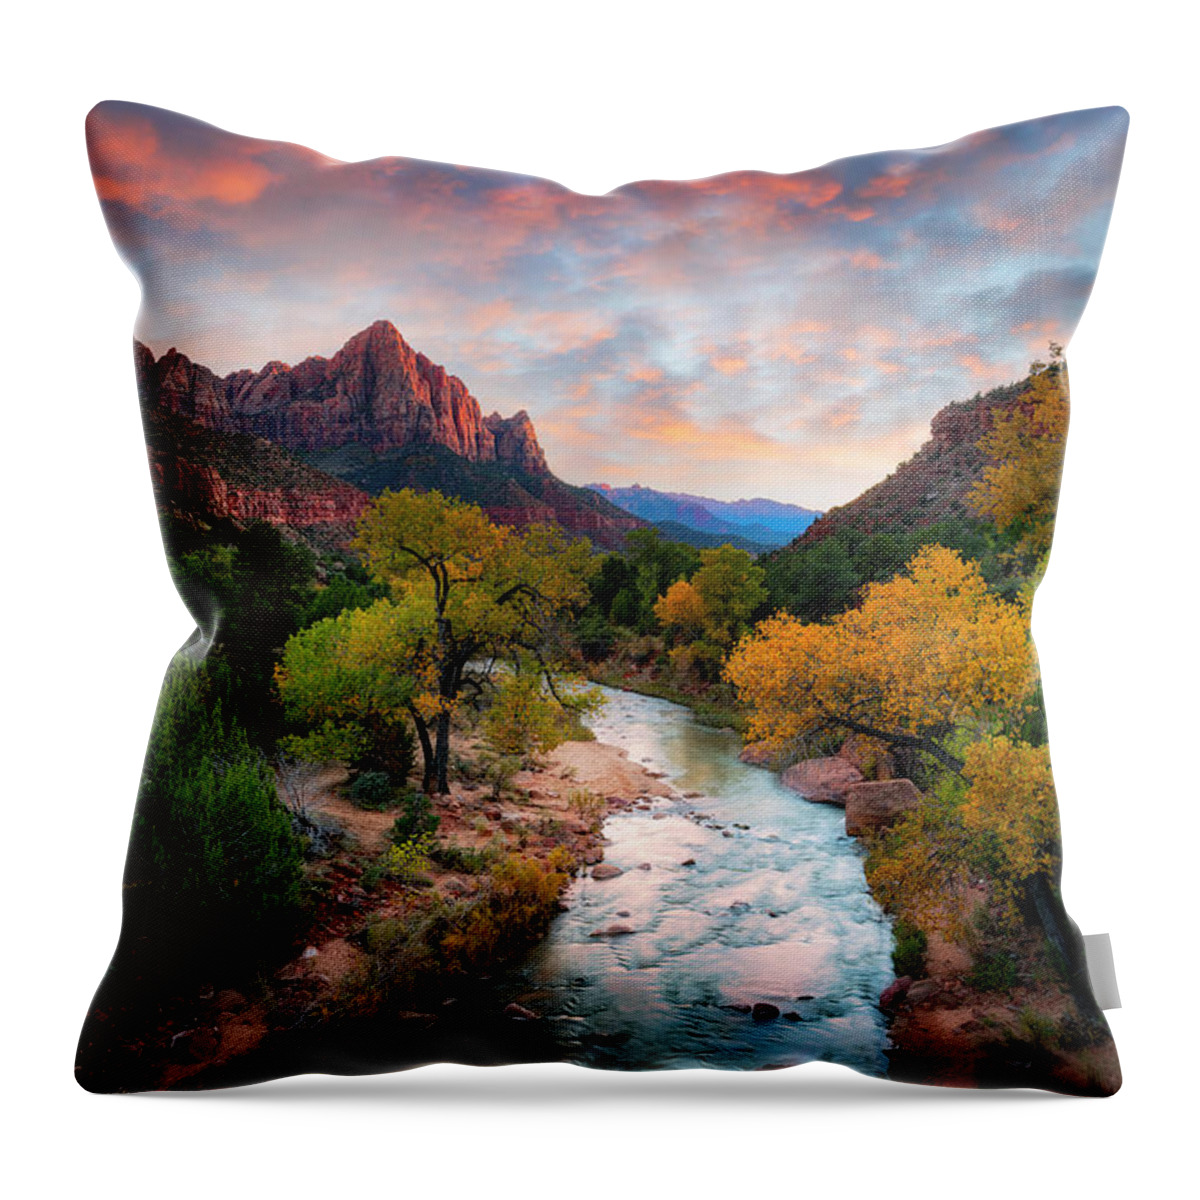 Sunset Throw Pillow featuring the photograph Sunset in Zion by Michael Ash